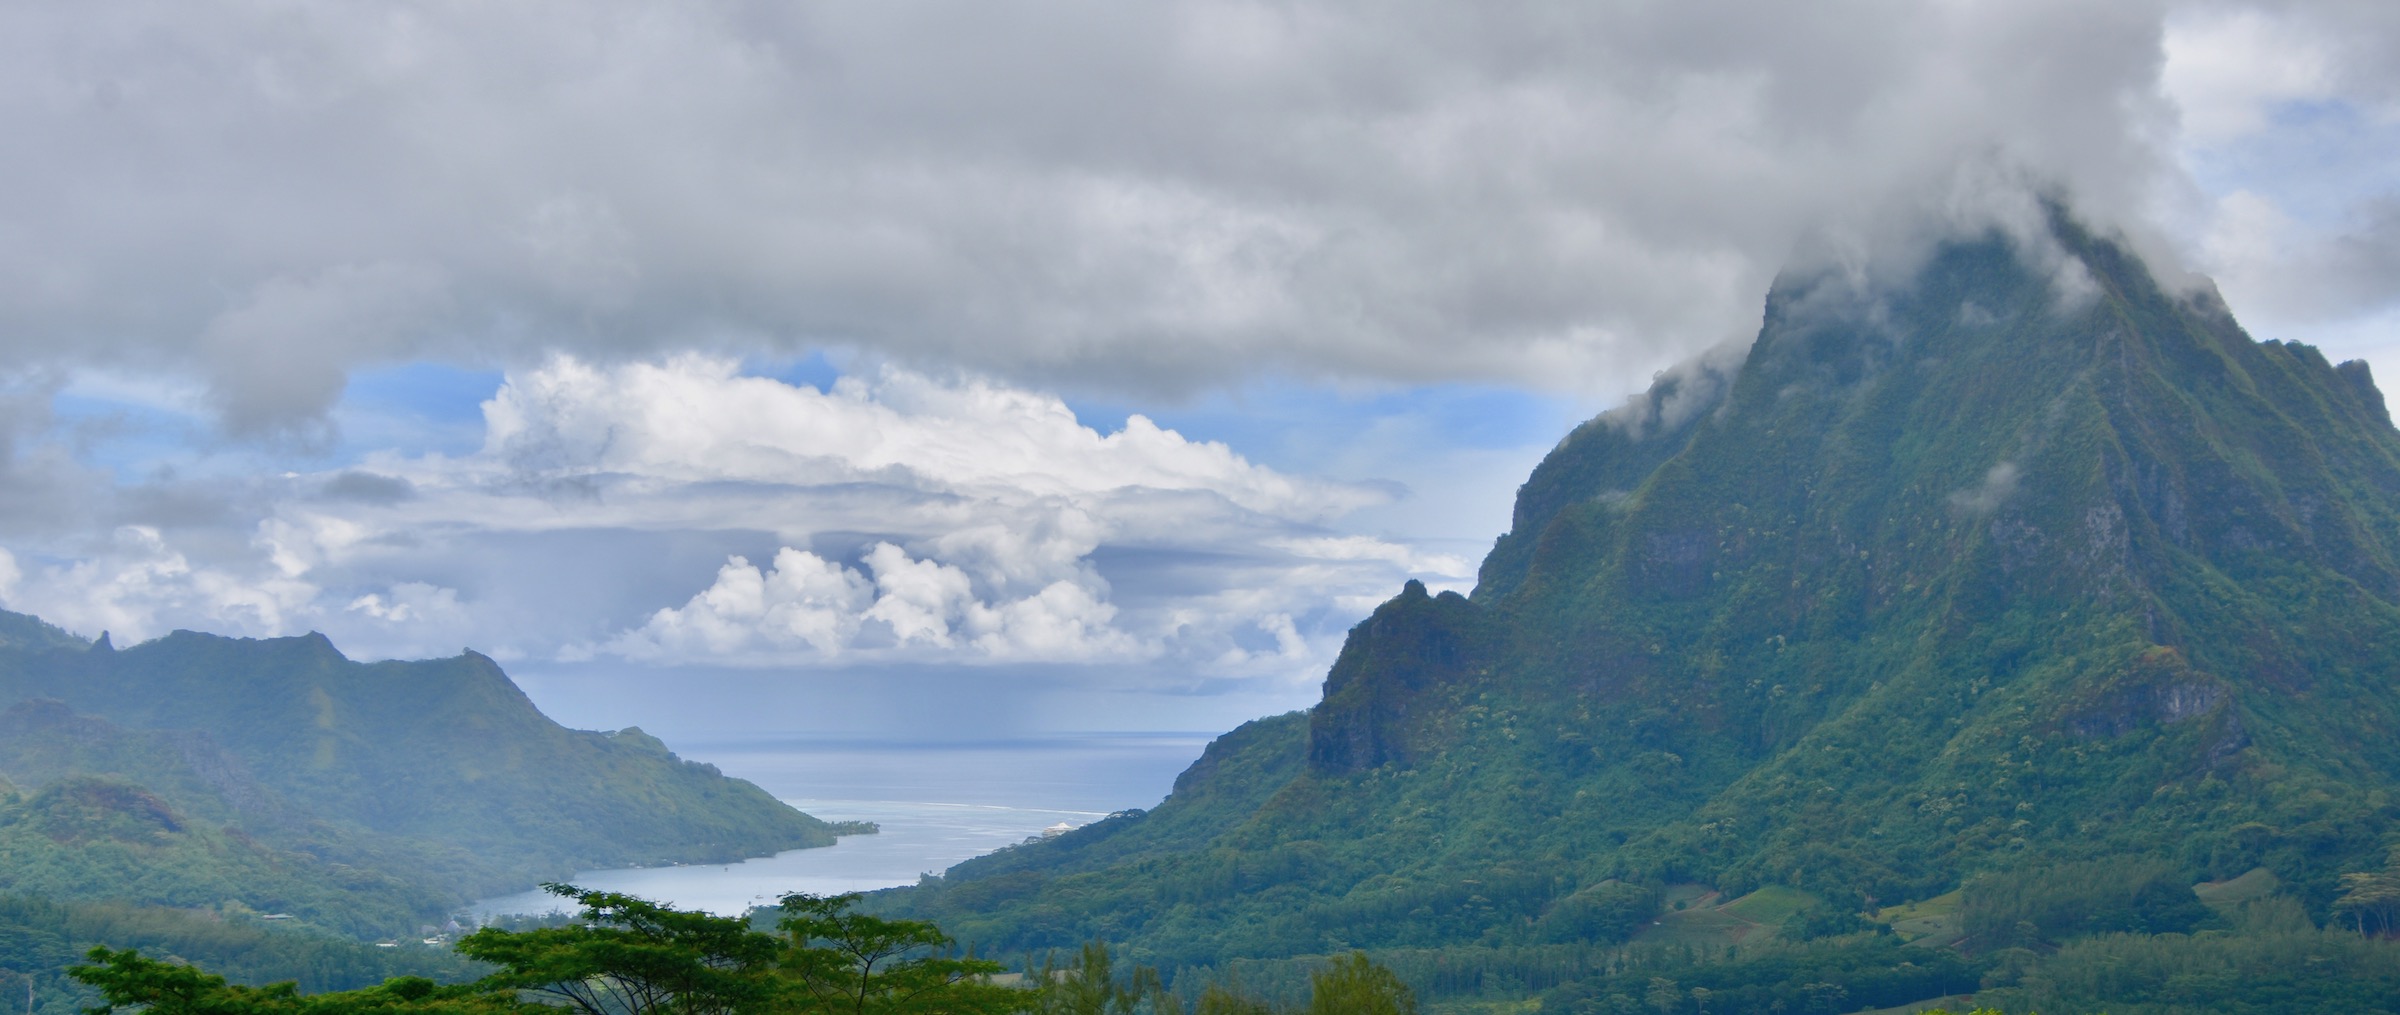 Mount Rotui and Onapohu Bay from the Belvedere, Moorea